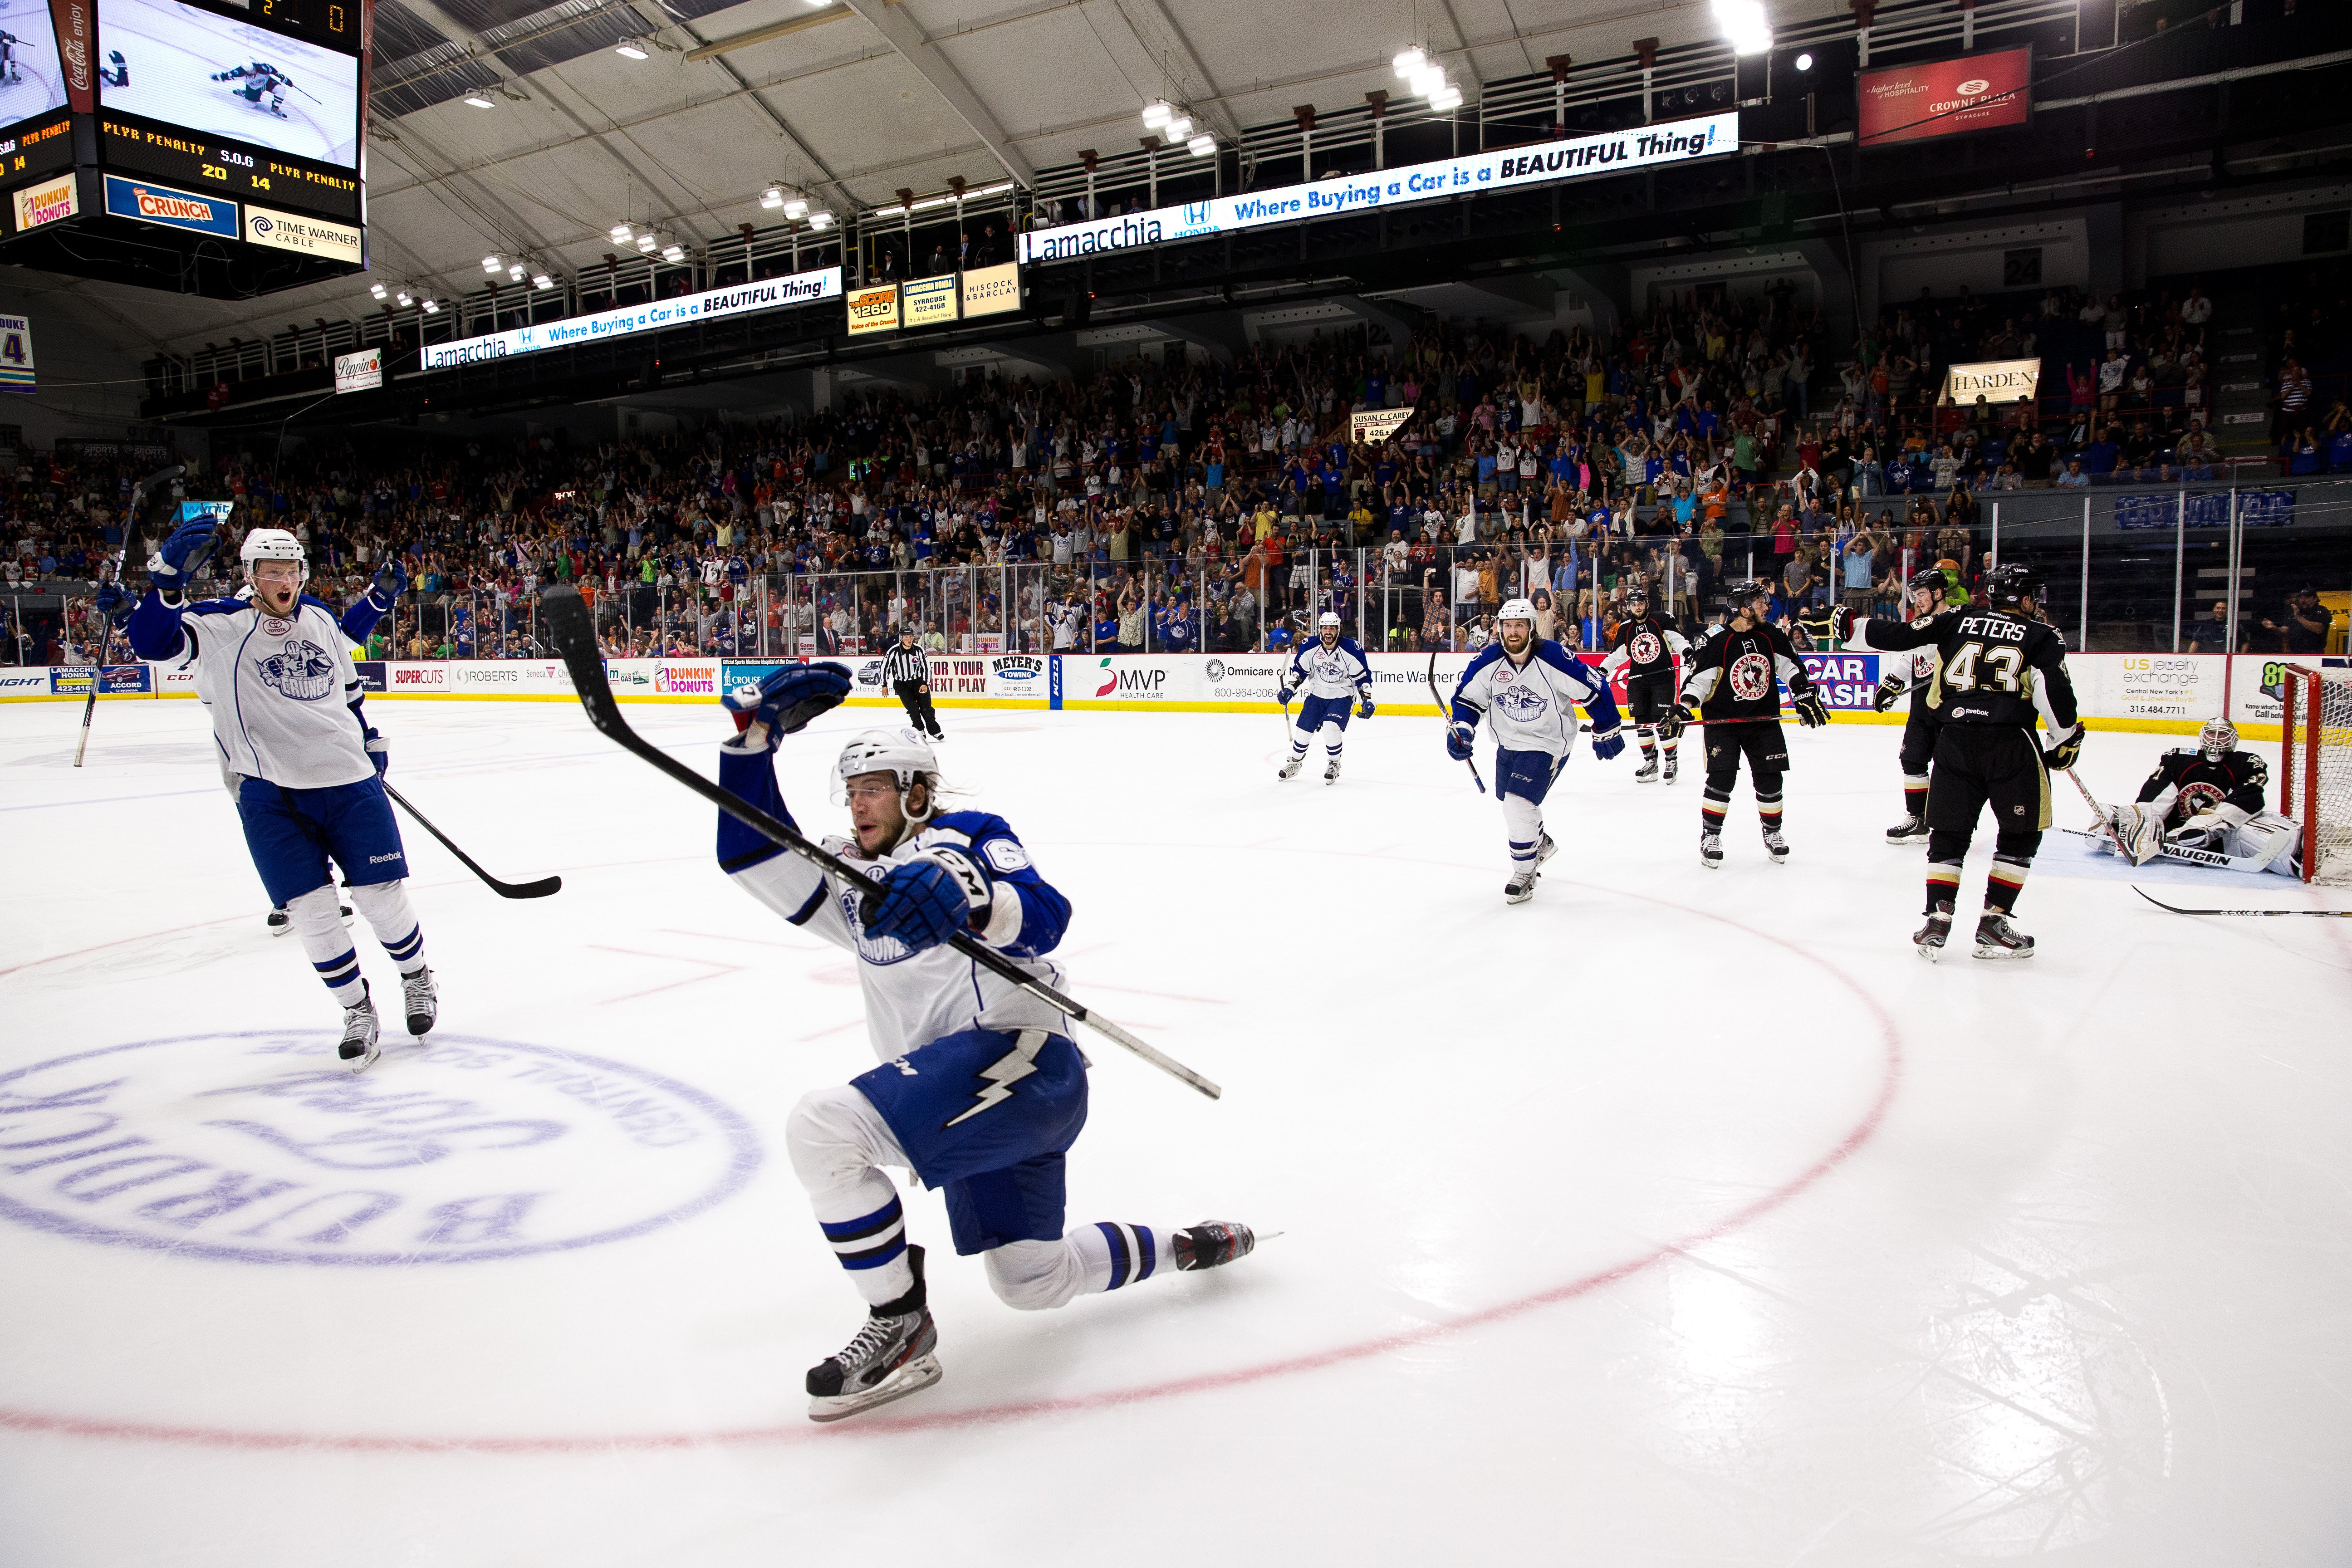 Syracuse Crunch forward Jonathan Marchessault adds another